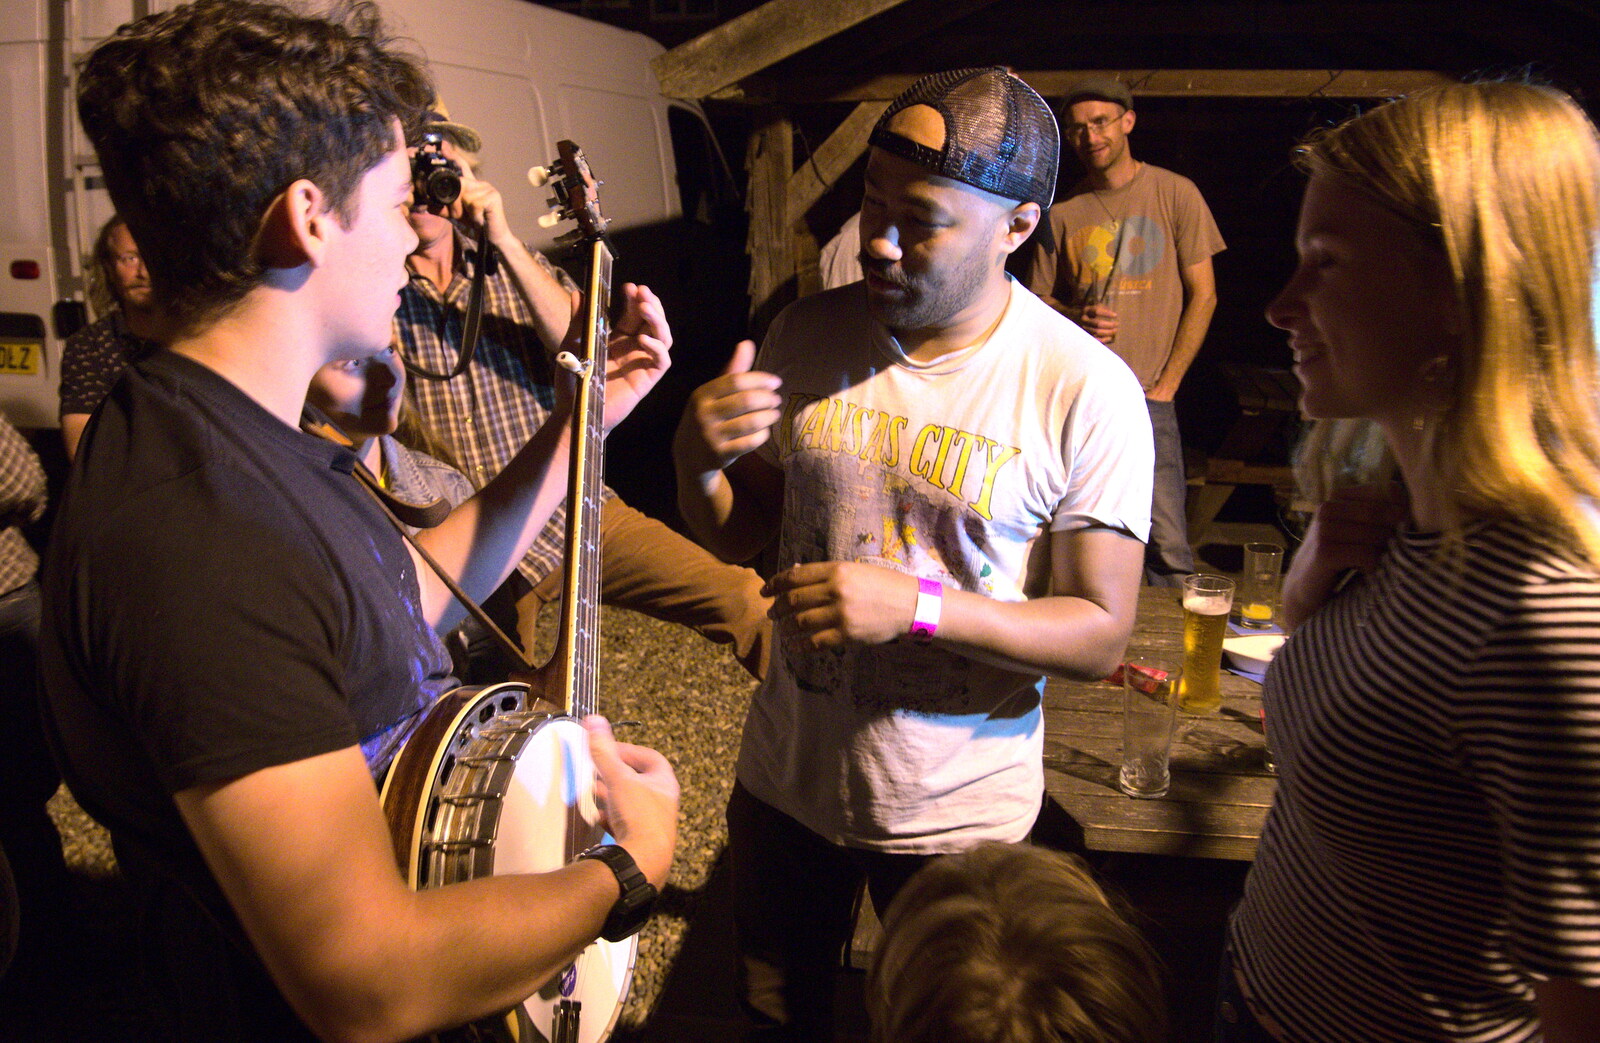 James Bookert gives an impromptu banjo lesson from The Whiskey Shivers at The Crown, Burston, Norfolk - 1st August 2018